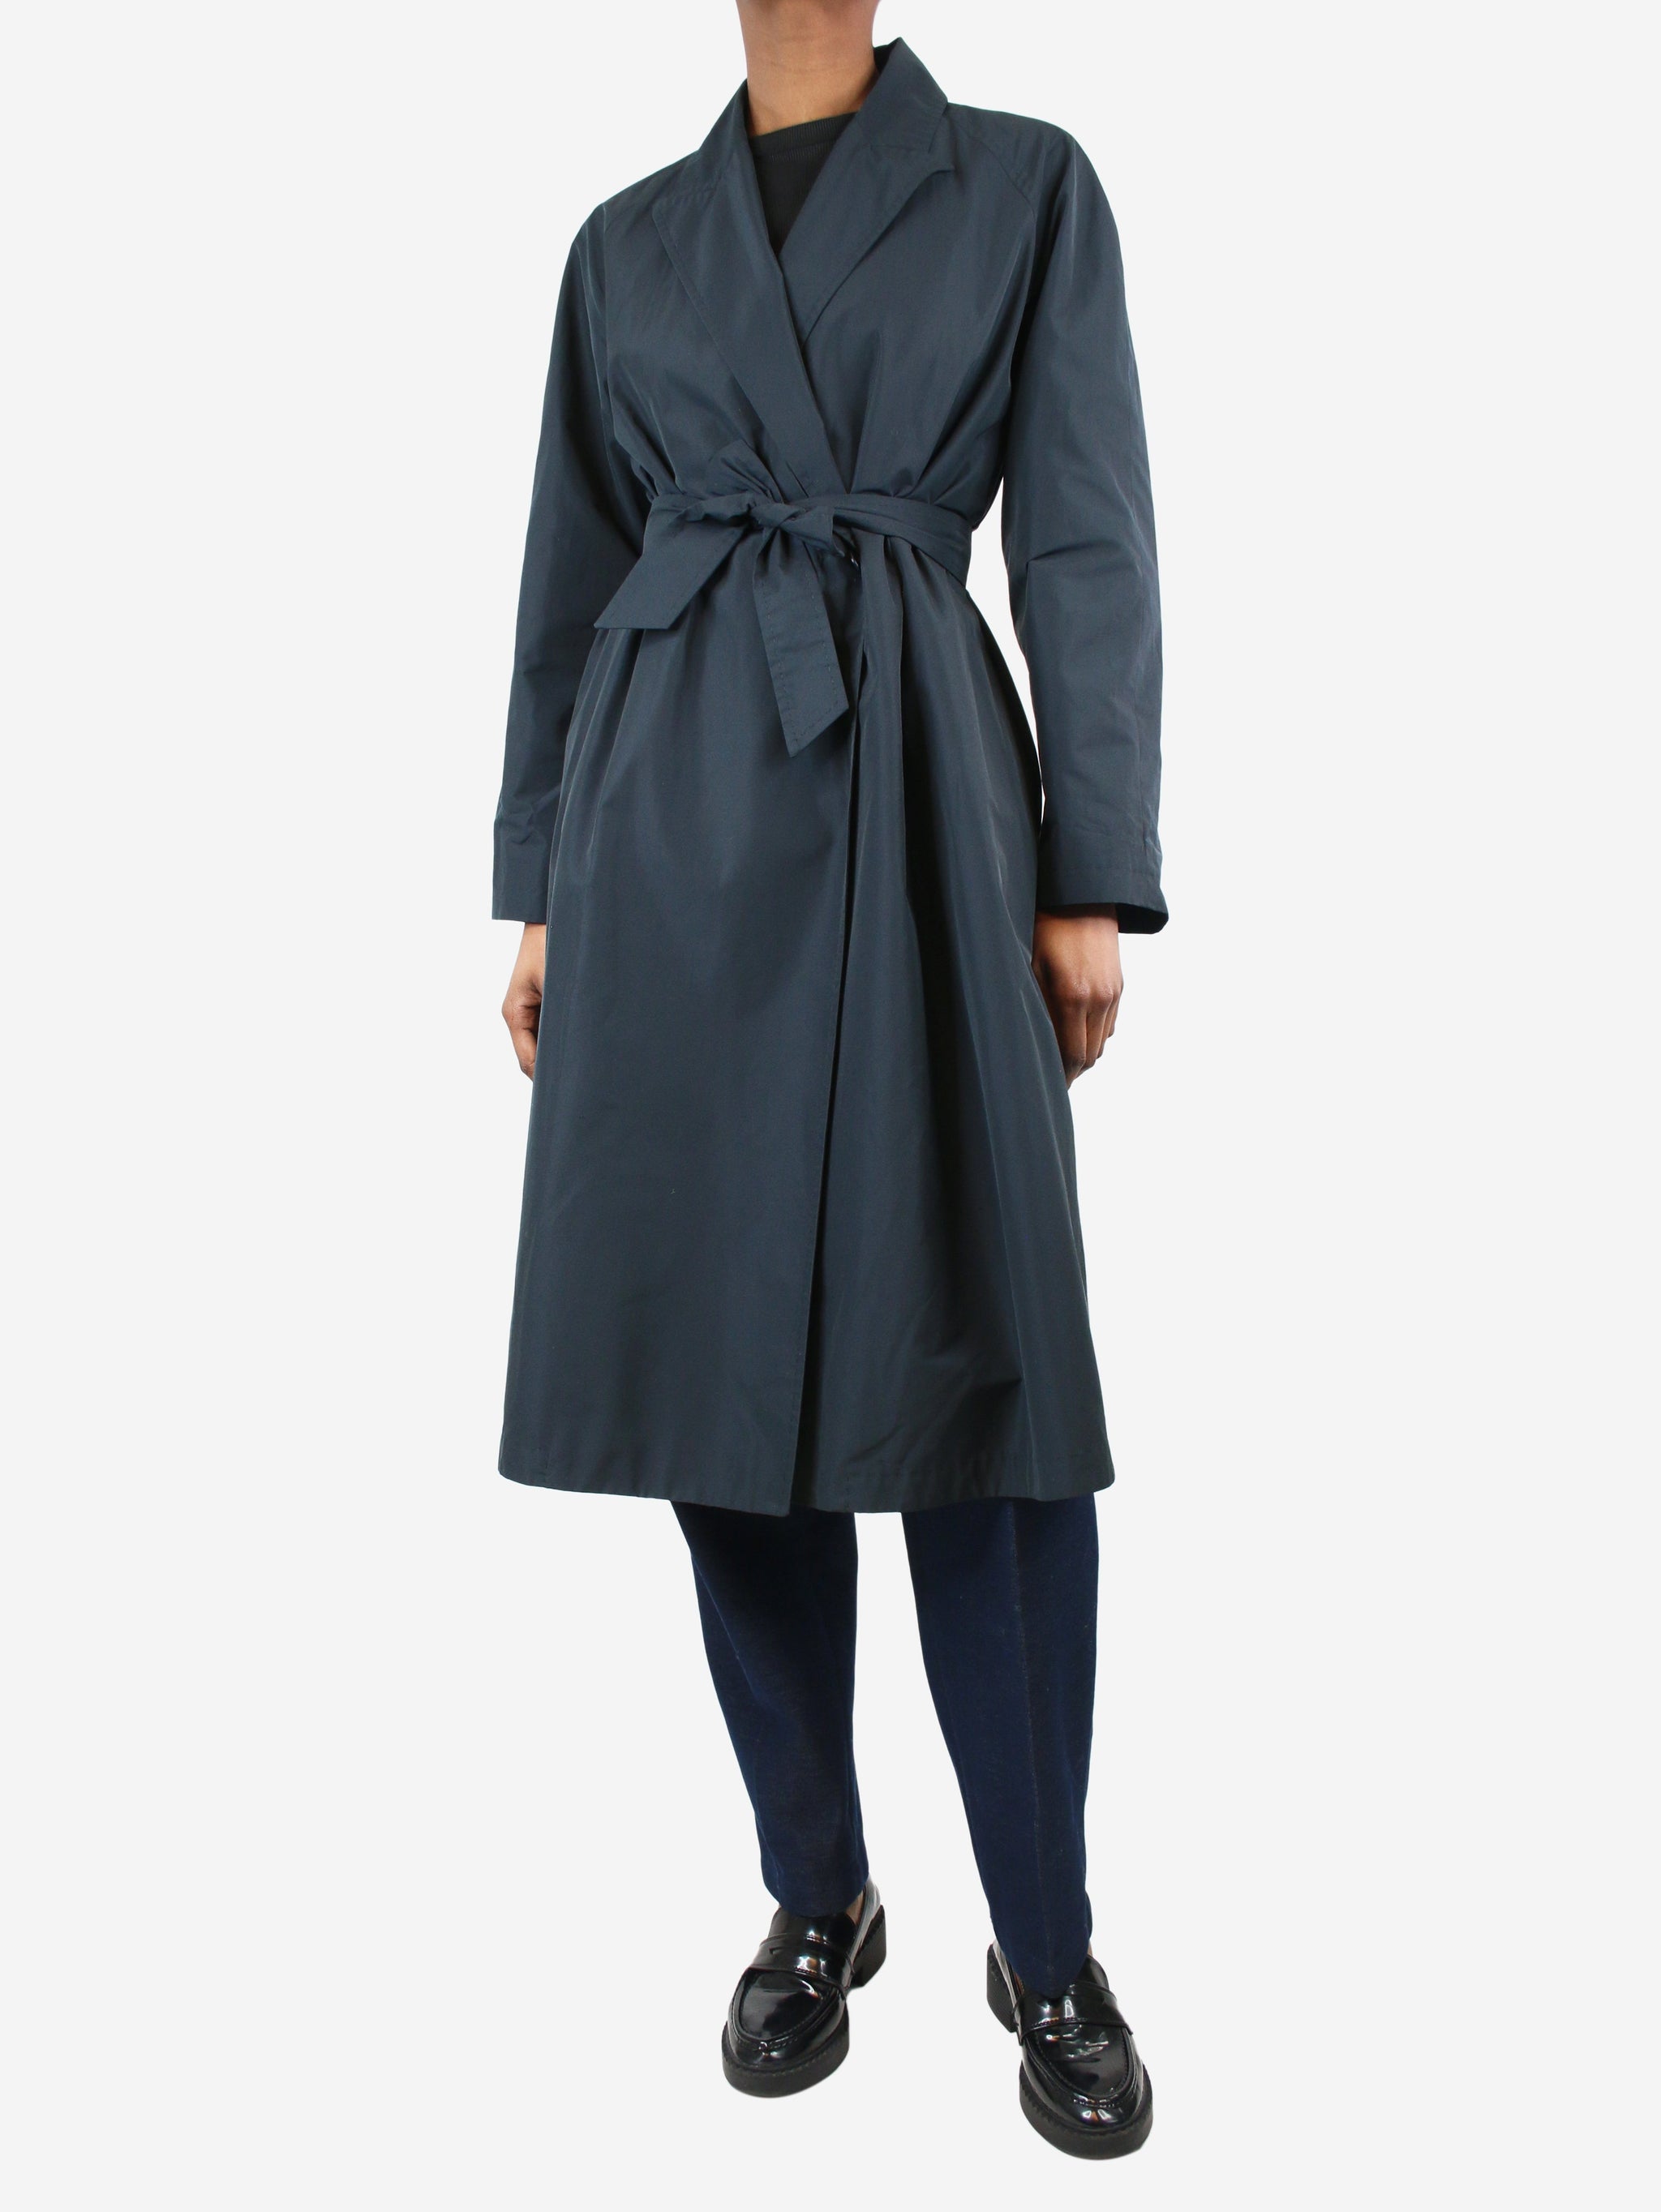 Max Mara pre-owned dark blue belted trench coat | Sign of the Times